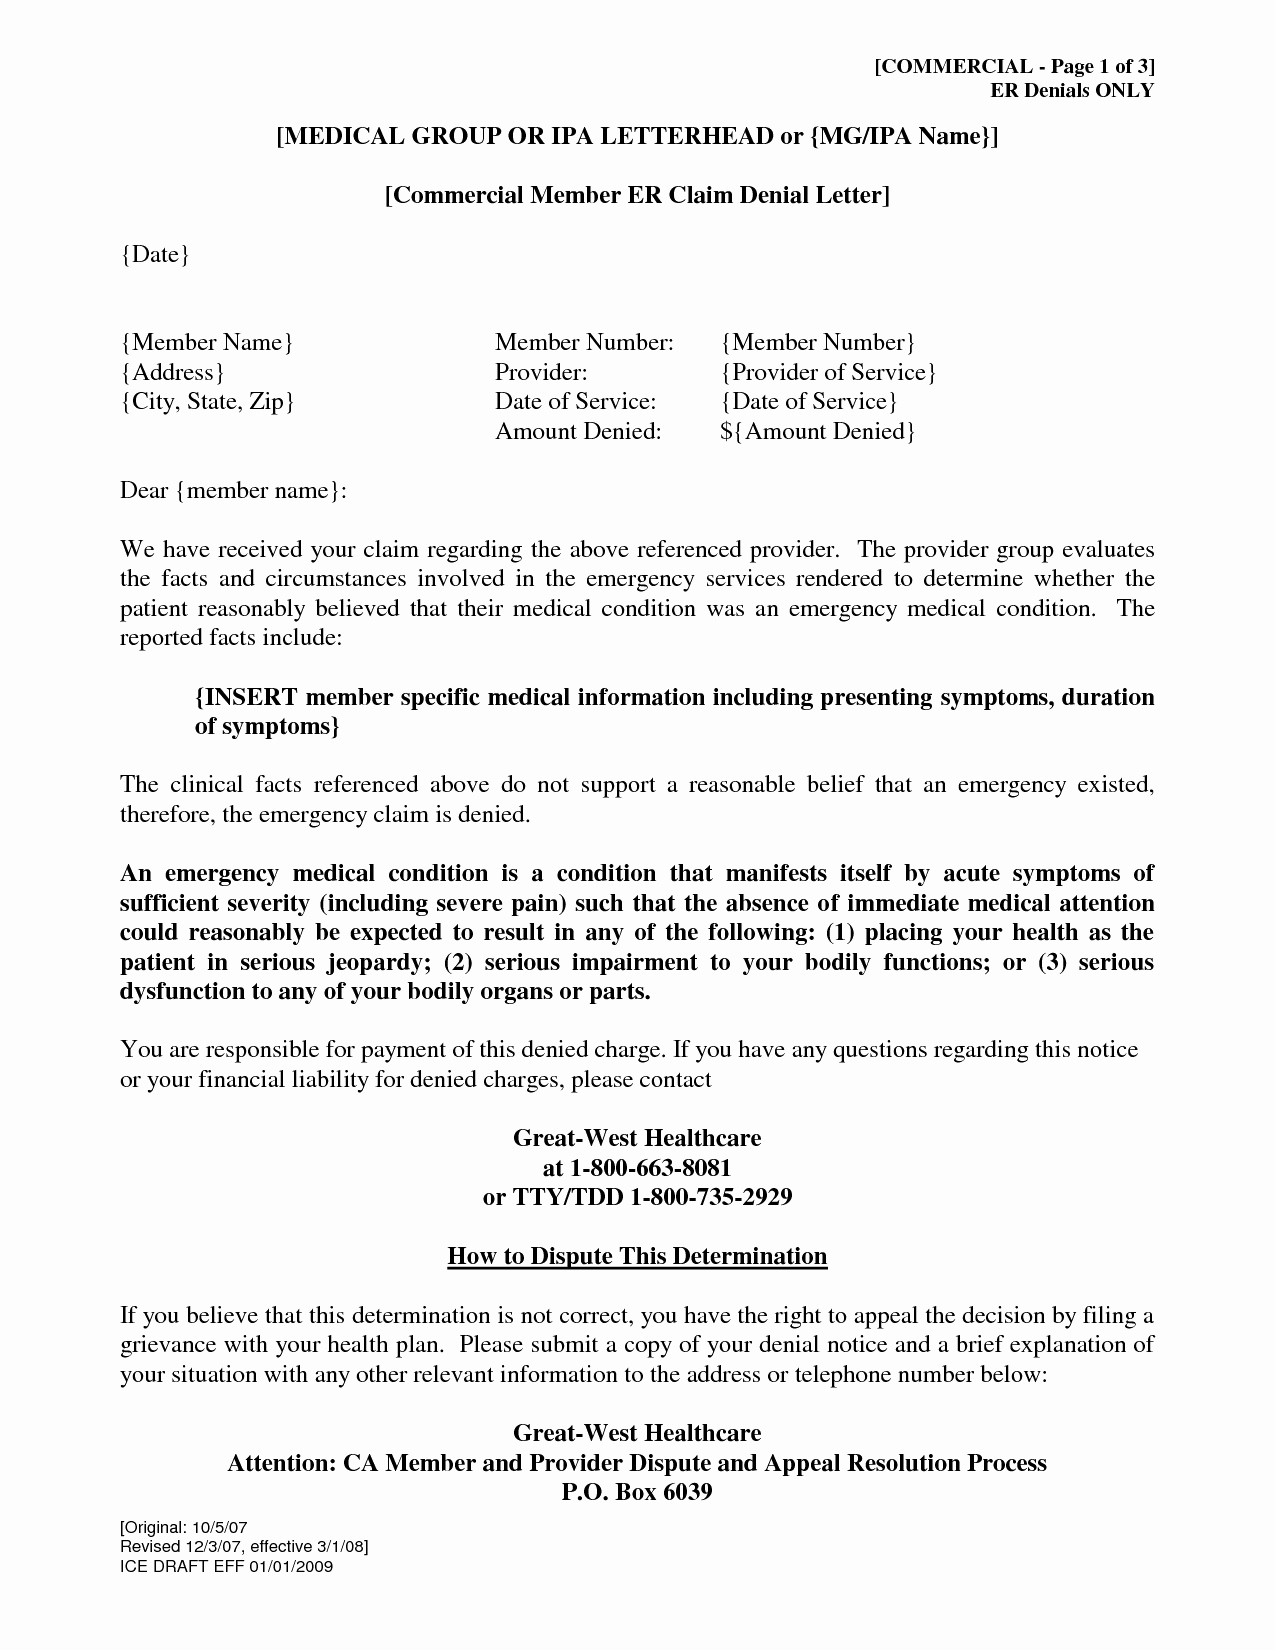 Medical Negligence Complaint Letter Template - How to Write A Medical Plaint Letter Image Collections Letter